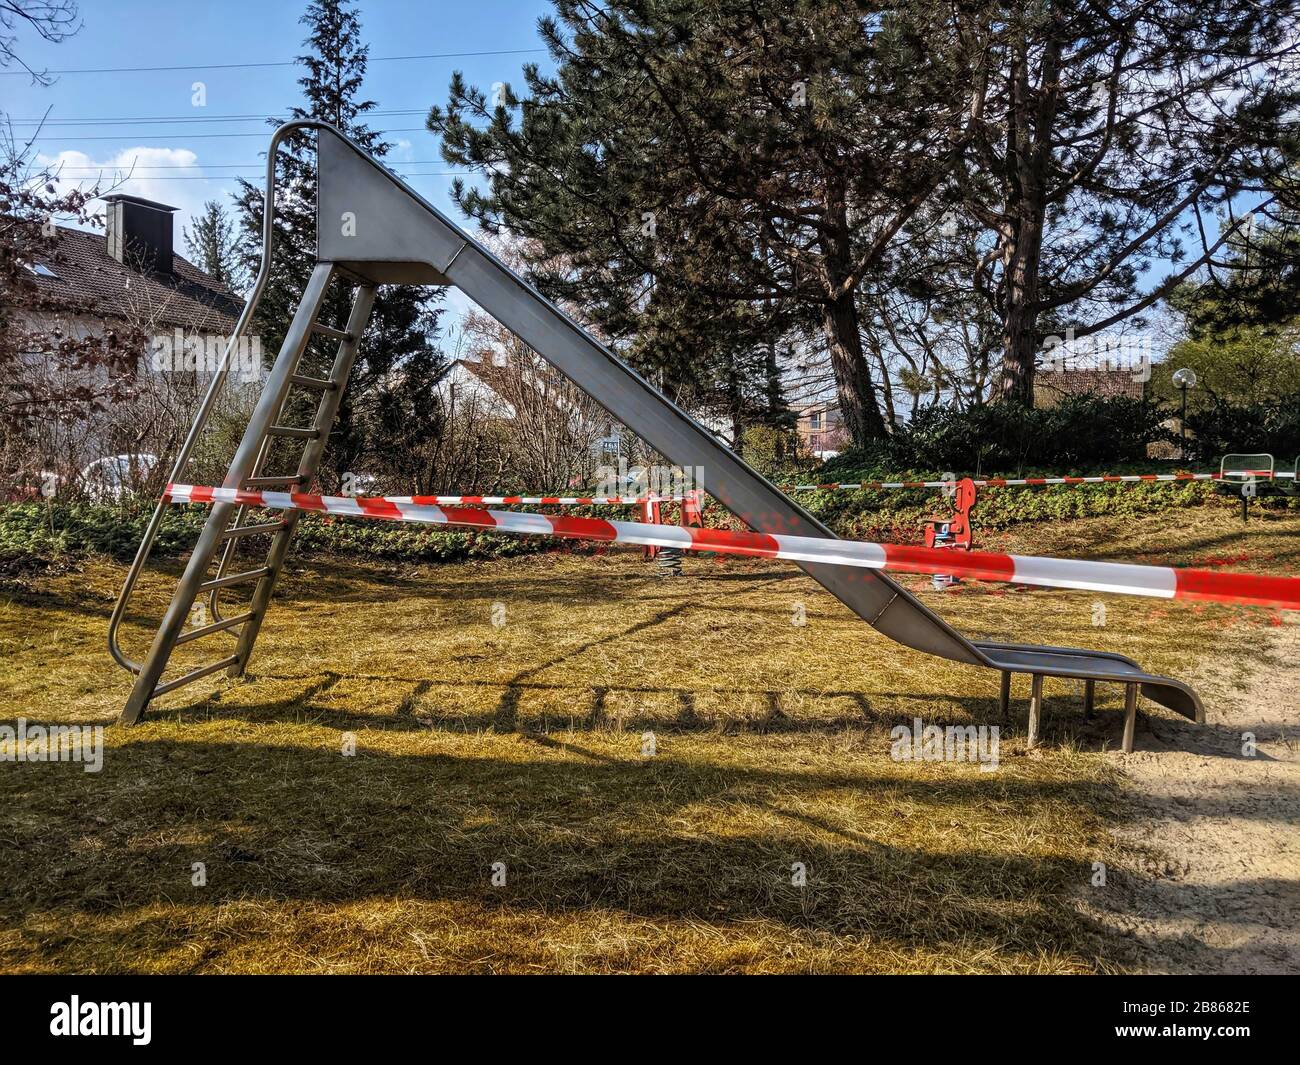 Munich, Bavaria, Germany. 20th Mar, 2020. Playgrounds in Munich, Germany are the latest meeting places to be targeted with closures by police, administrations, and groundskeepers and property owners in order to stem the spread of Covid-19 (SARS COV 2) Credit: Sachelle Babbar/ZUMA Wire/Alamy Live News Stock Photo